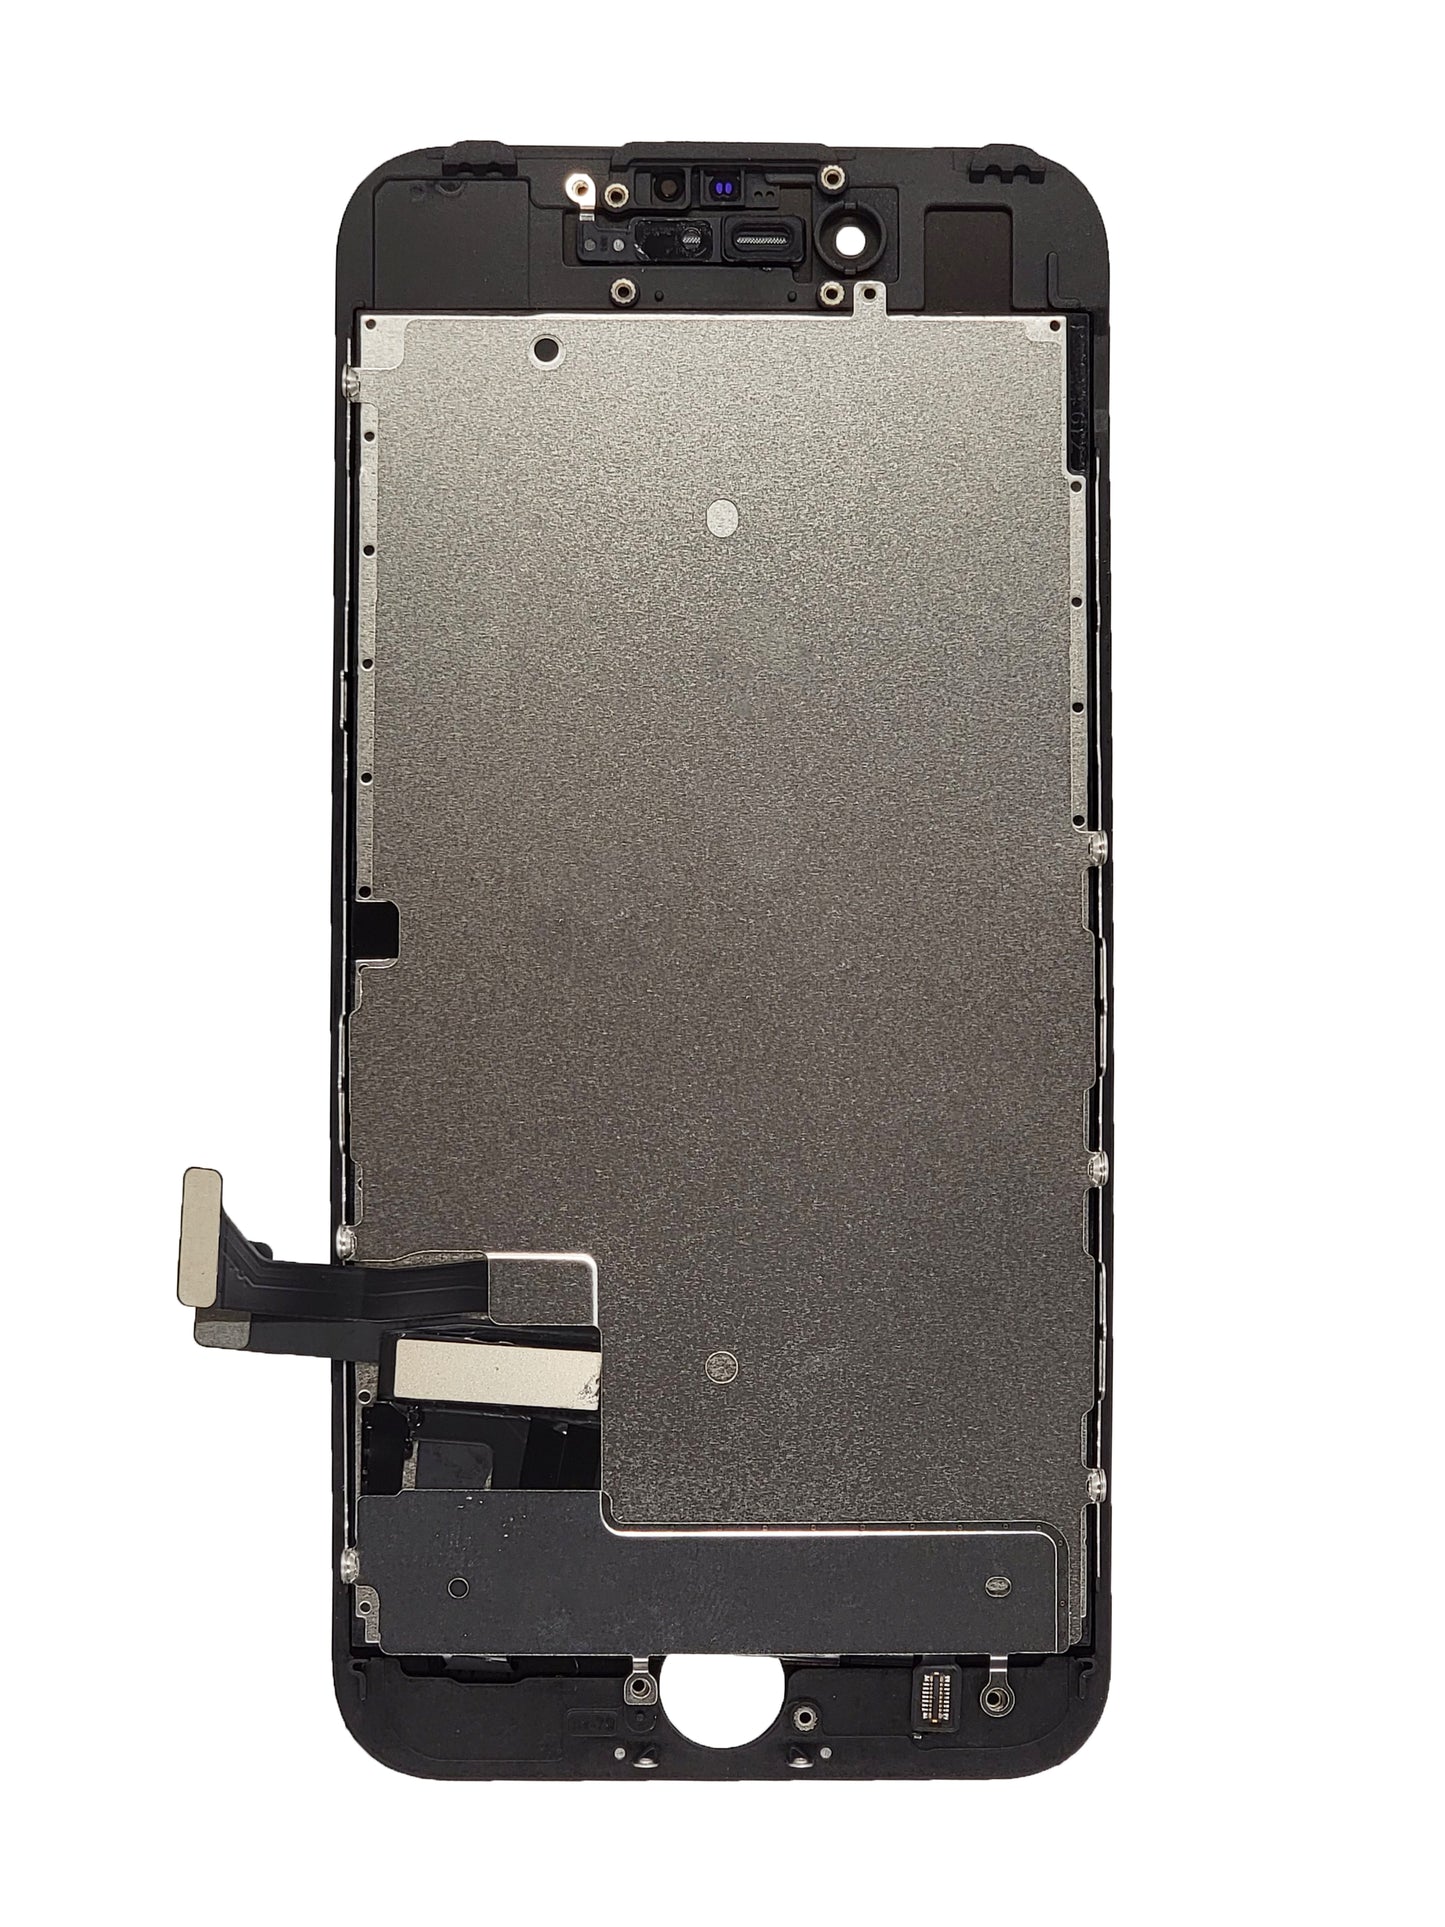 iPhone 7 LCD Assembly (Aftermarket Plus) (Black)